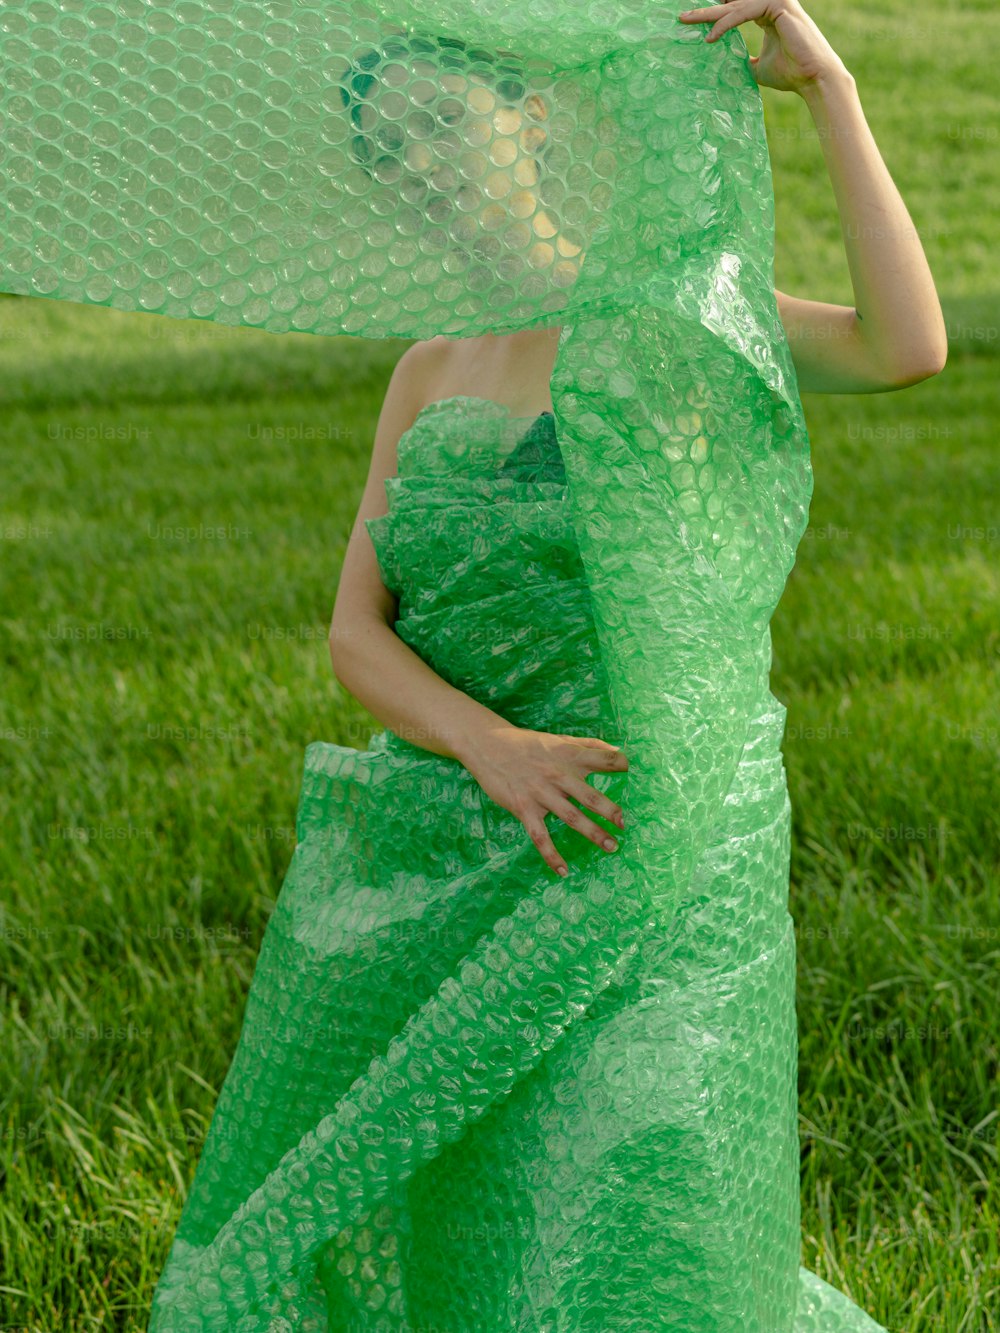 a woman in a green dress is holding a piece of plastic